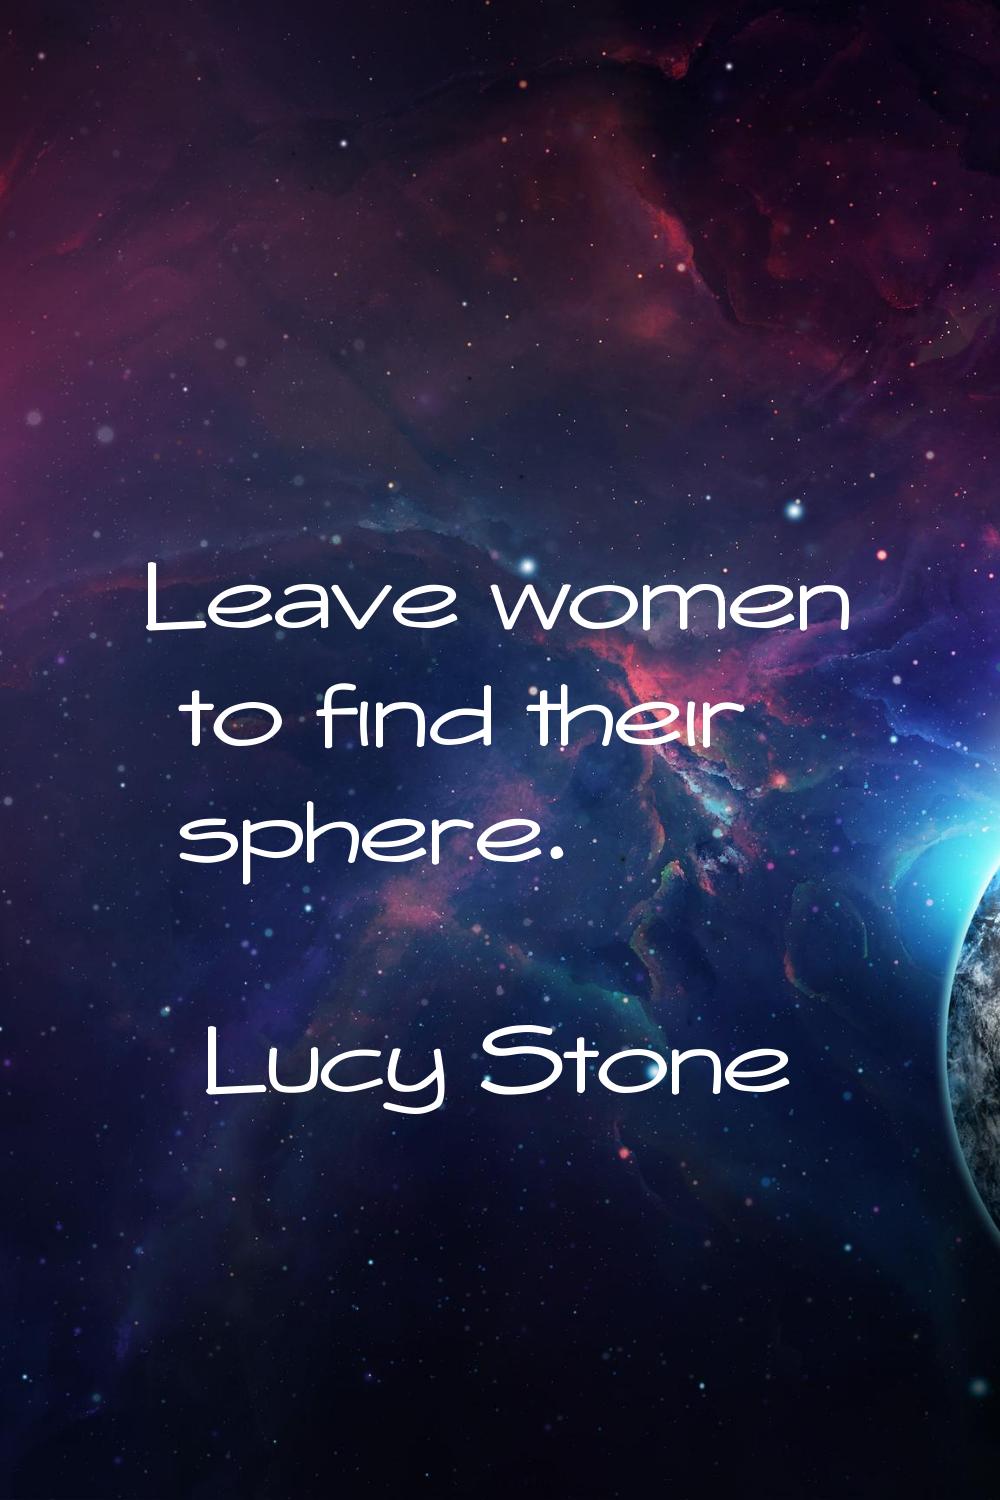 Leave women to find their sphere.